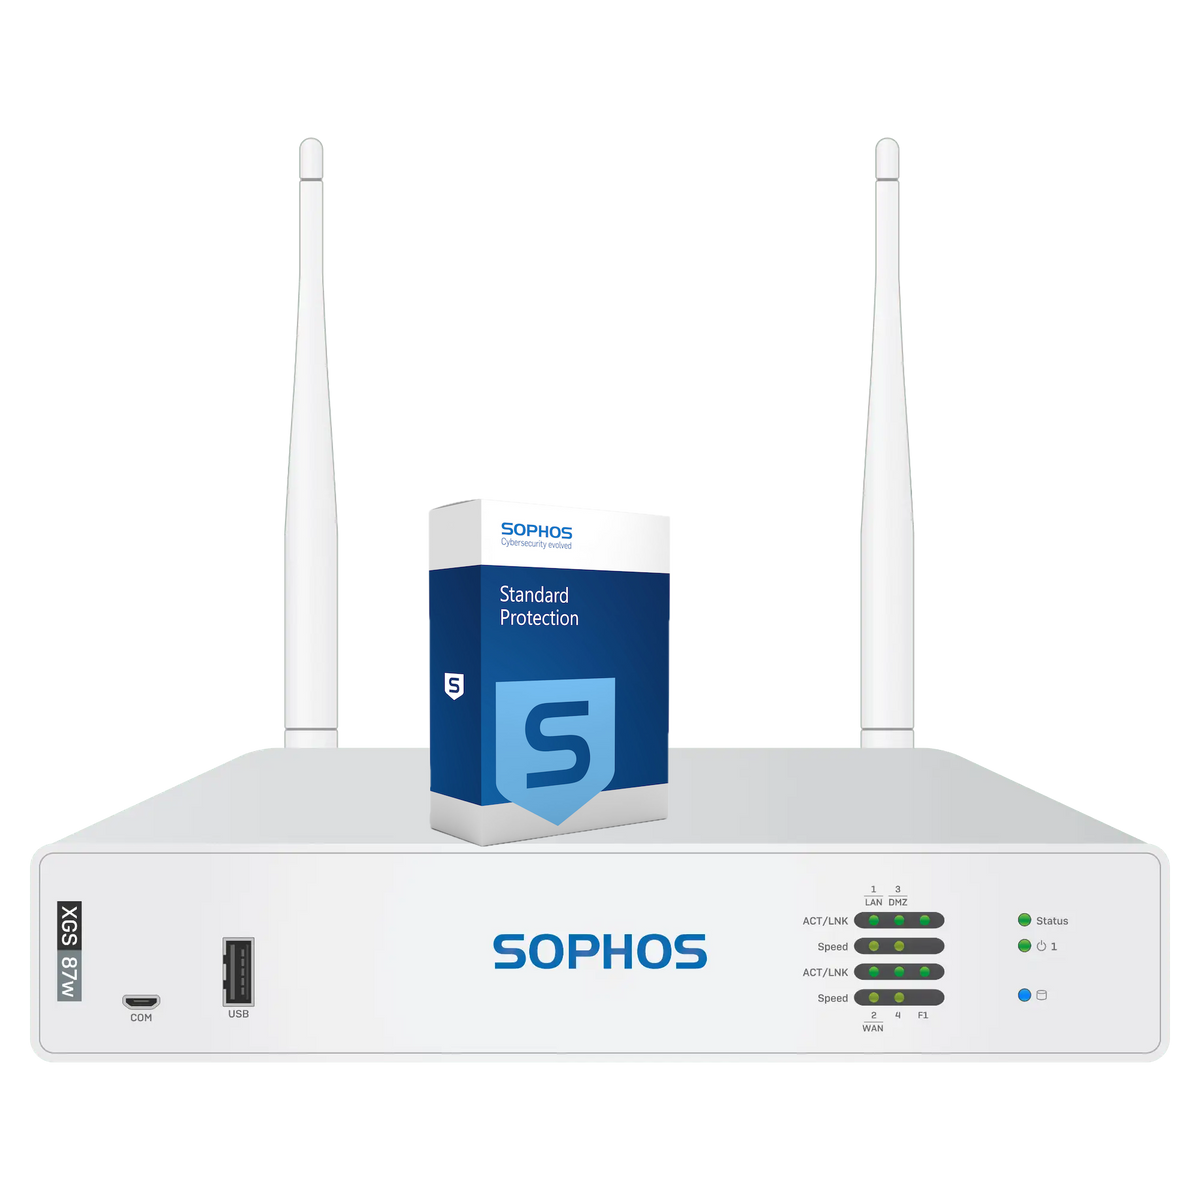 Sophos XGS 87w Firewall with Standard Protection, 1-year - EU power cord